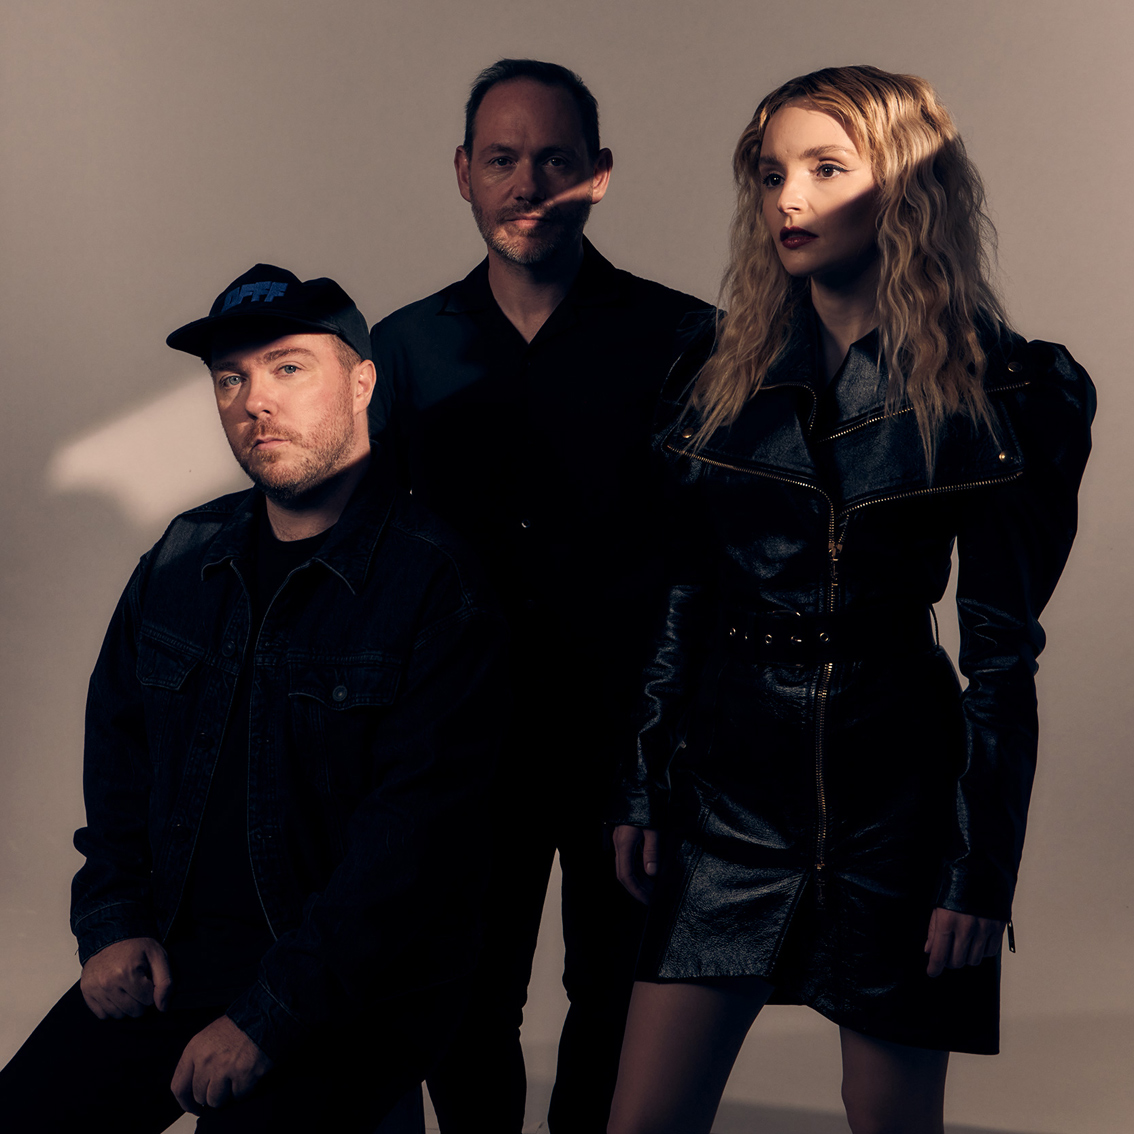 04_20210814-SPIN_Chvrches-0277-wip-websized-photofolio